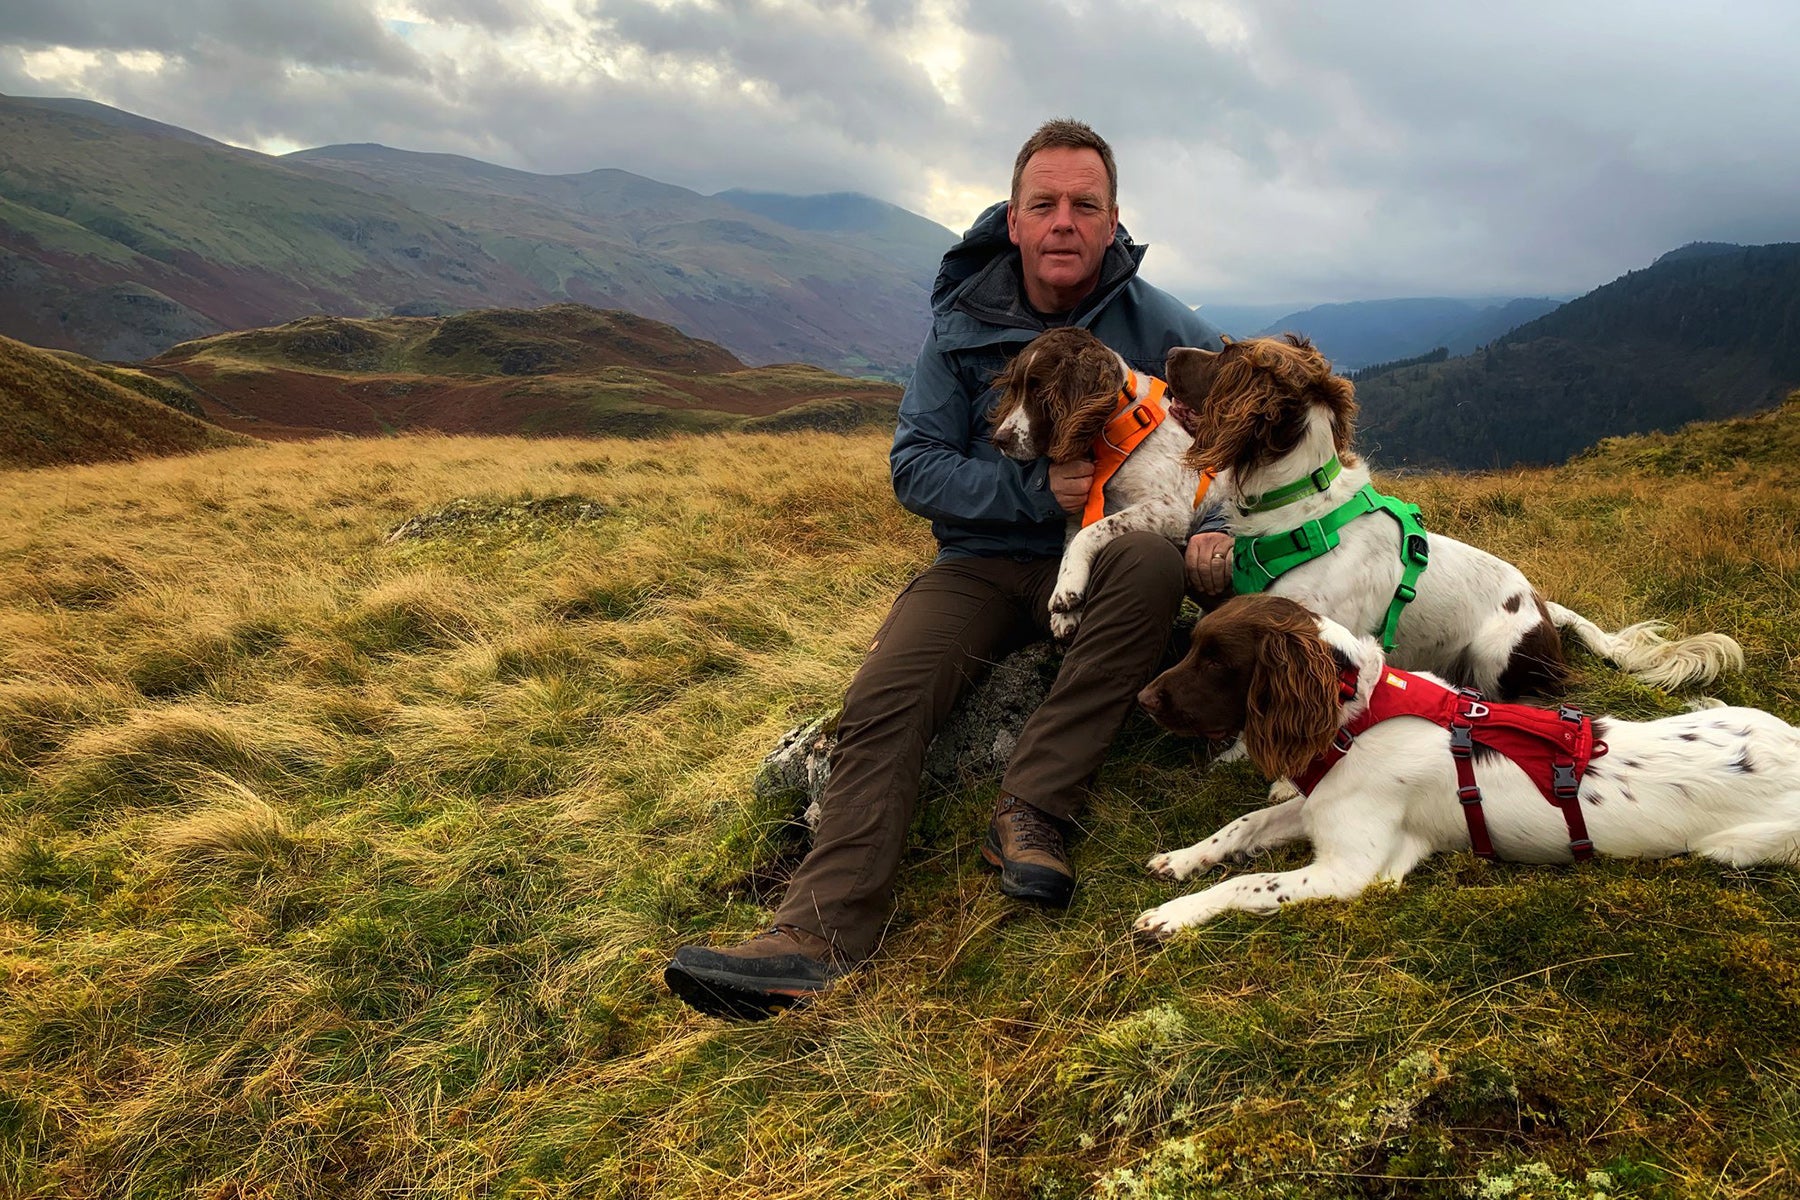 Ambassador Kerry with his three dogs in ruffwear harnesses outdoors.